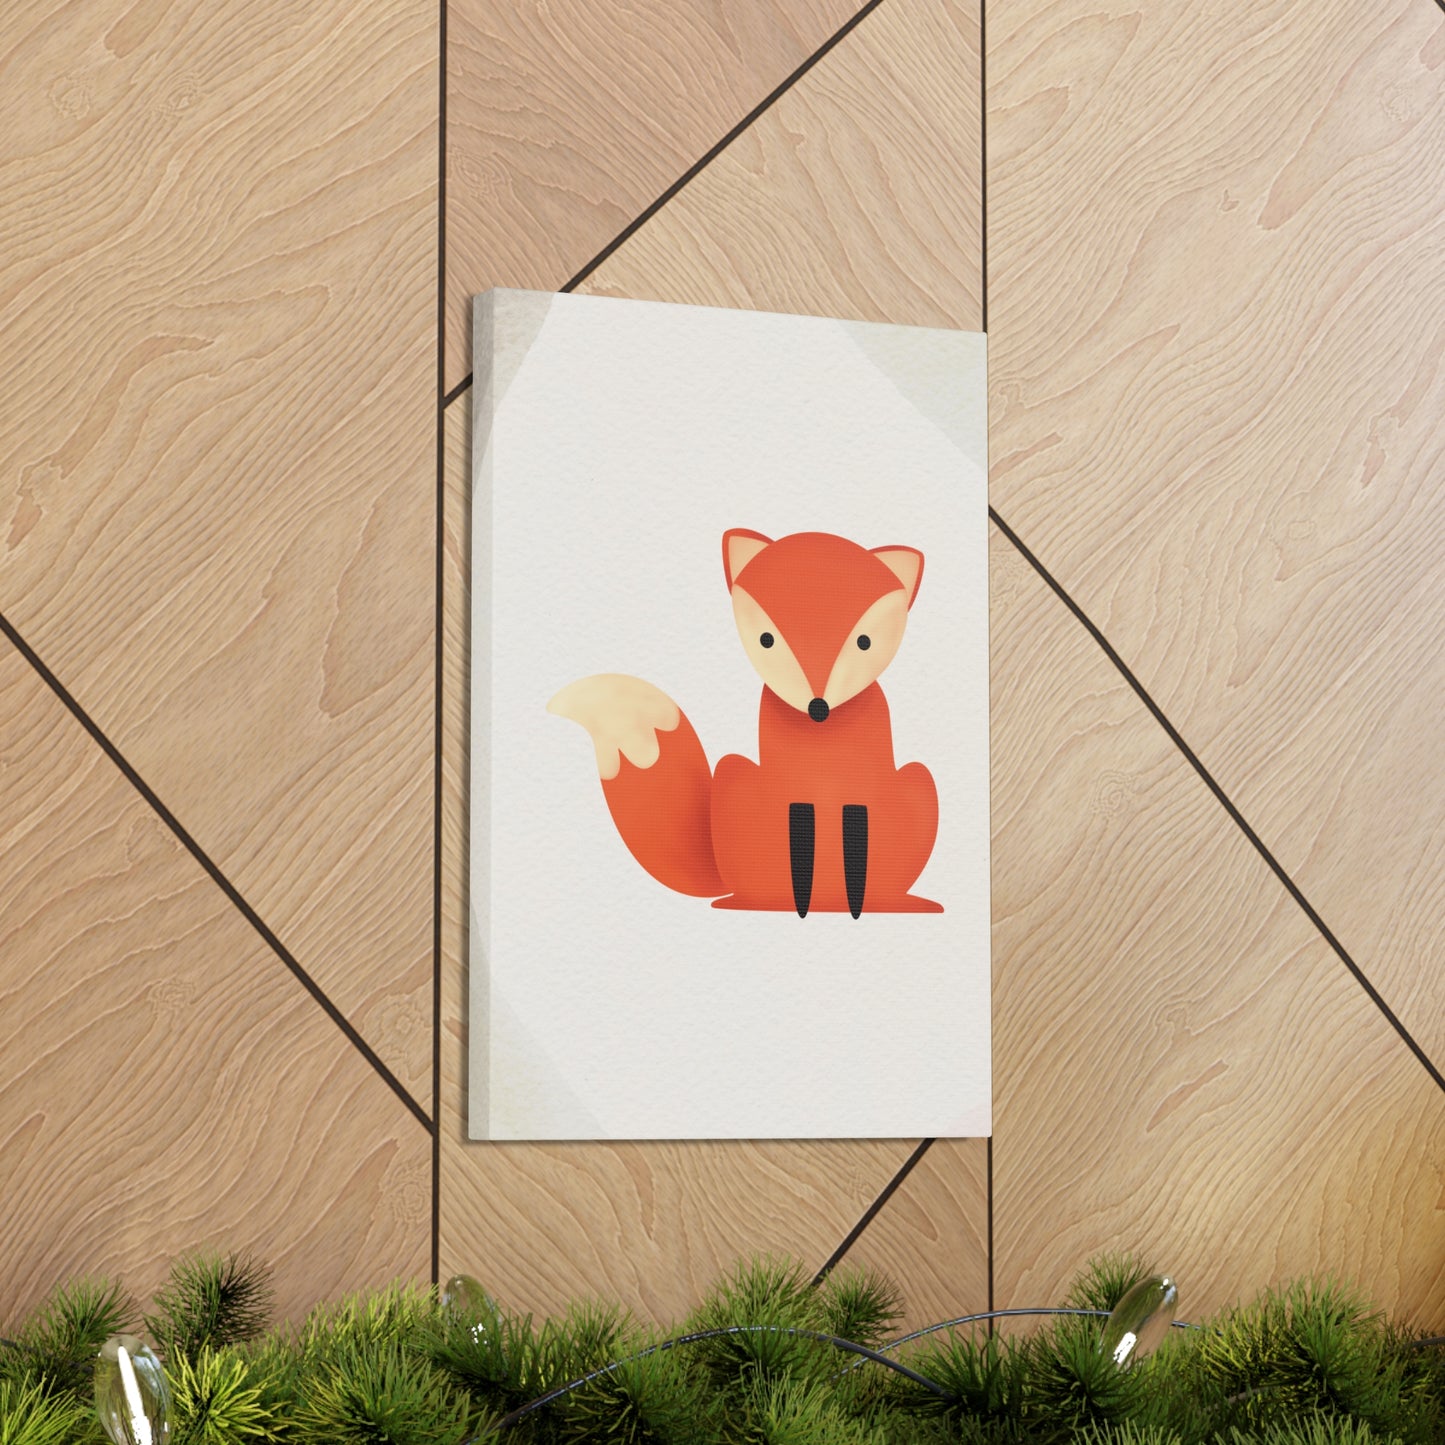 "Adorable Fox" Wall Art - Weave Got Gifts - Unique Gifts You Won’t Find Anywhere Else!